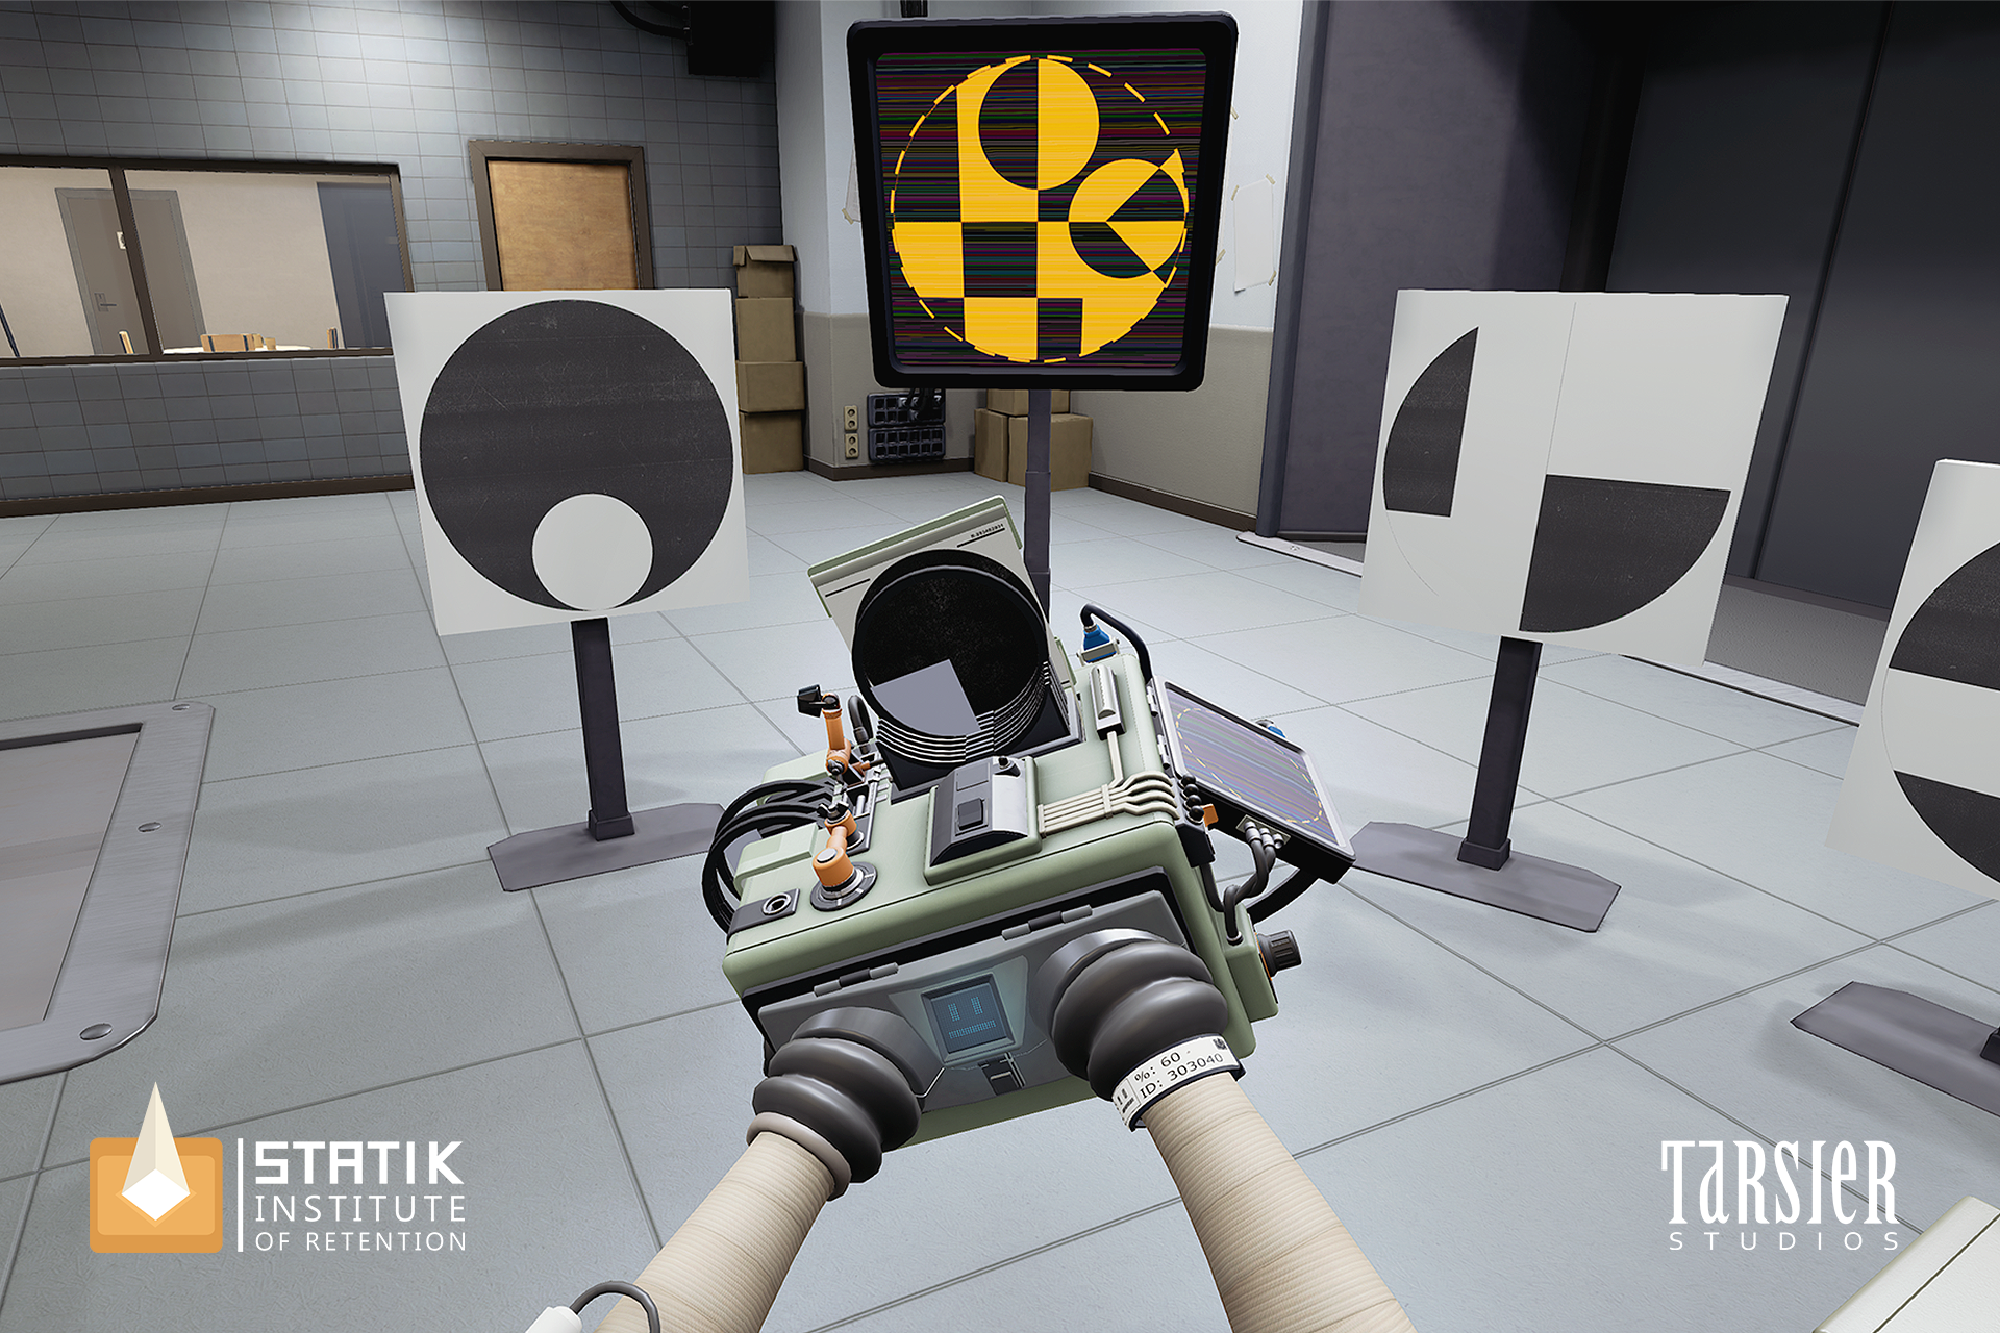 PSVR puzzle gameplay from statik, fourth puzzle